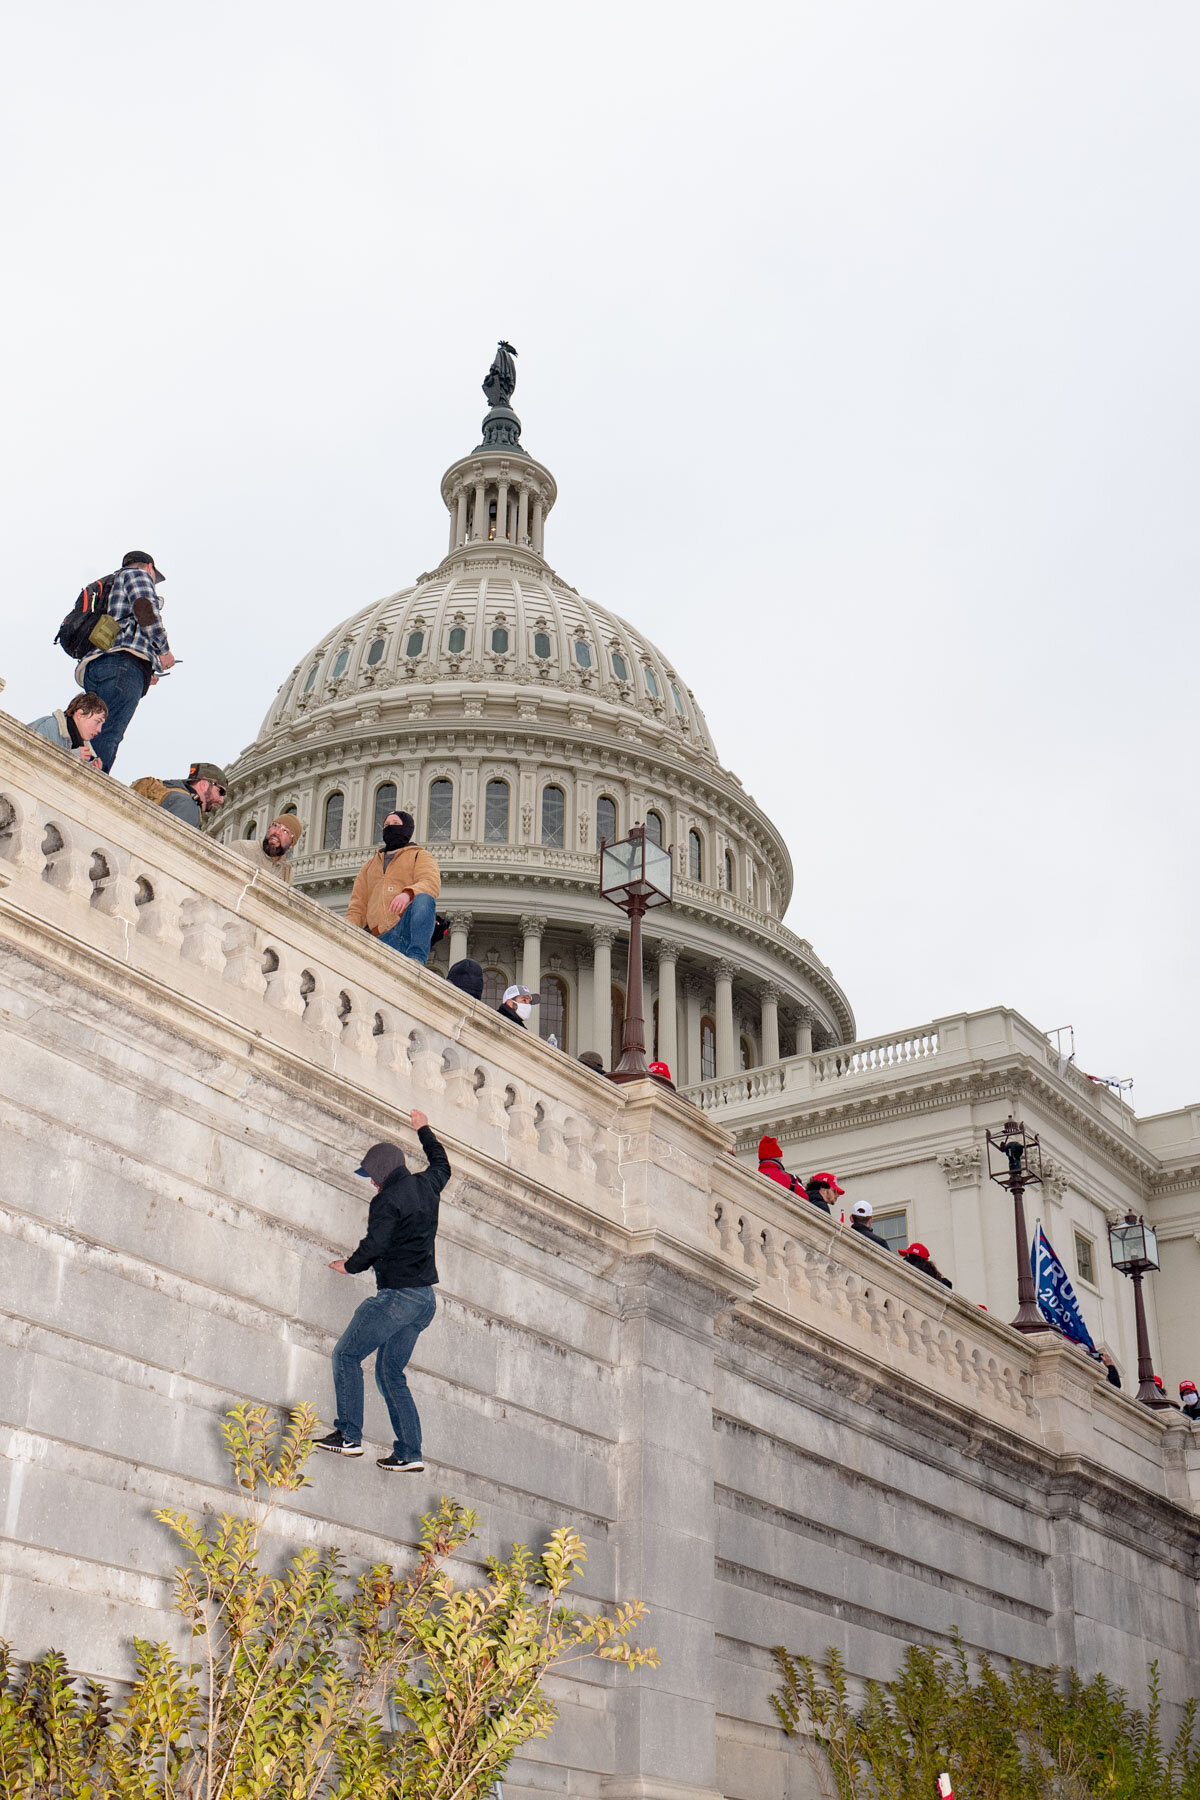  January 6th 2021 - A Trump supporter jumps from the second floor of the Capitol in Washington during the Storm of the Capitol. After following the mob and using makeshift latters, the supporters realized there were few entrances in the second floor 